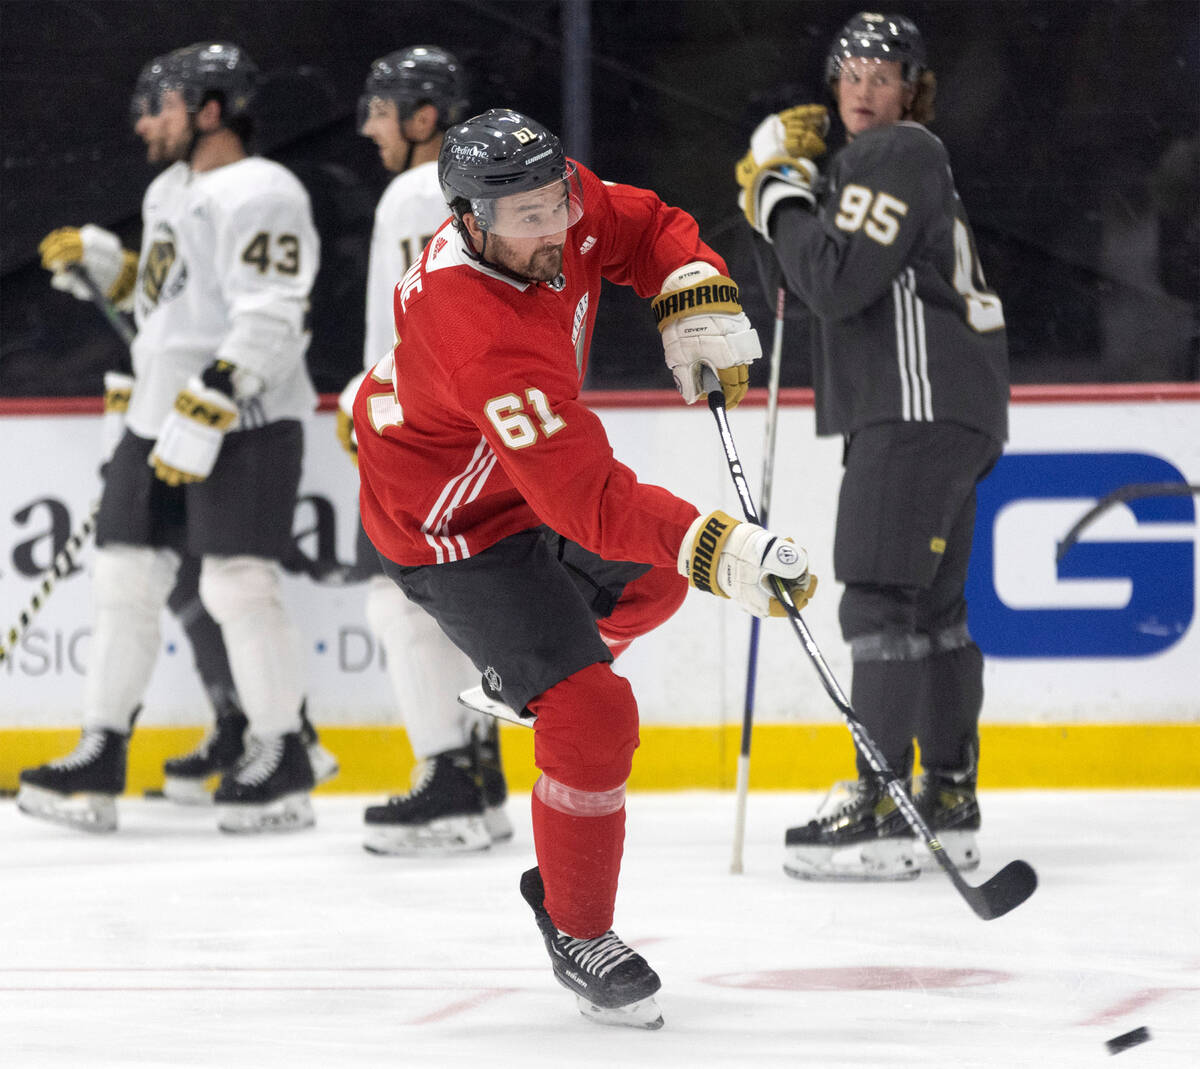 Golden Knights 2022-23 roster projection 1.0: What might happen